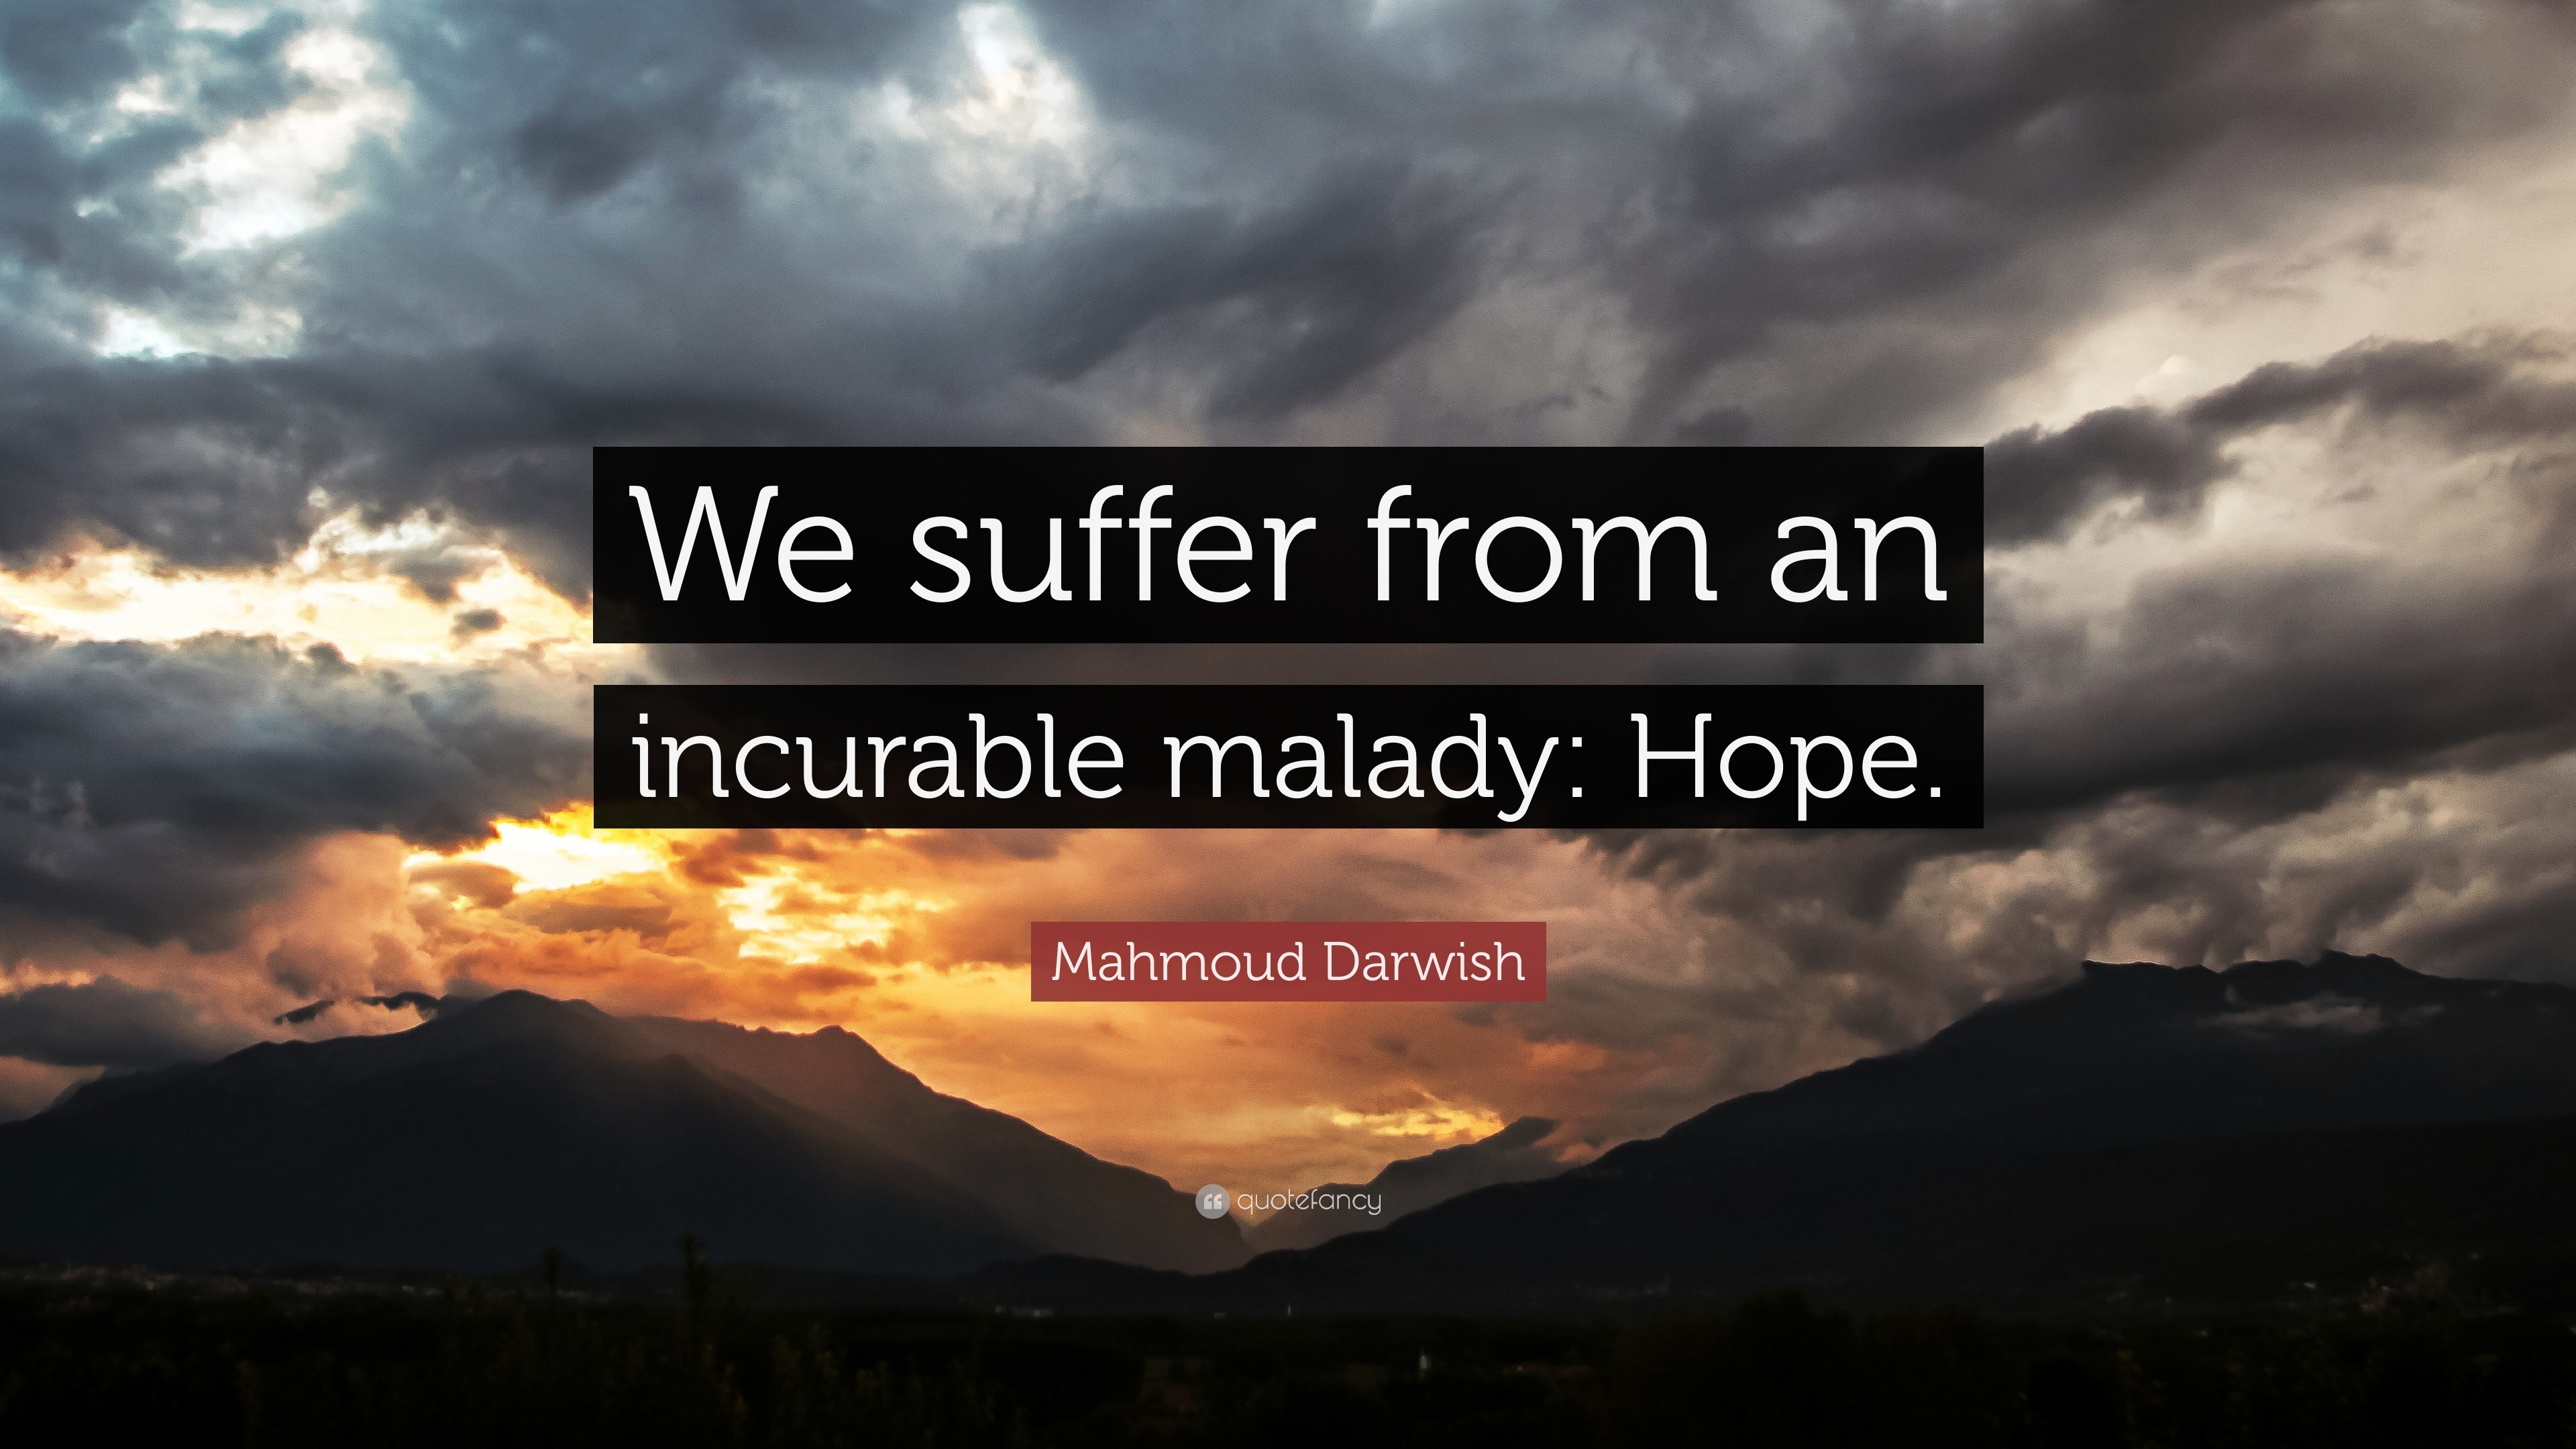 mahmoud-darwish-quote-we-suffer-from-an-incurable-malady-hope